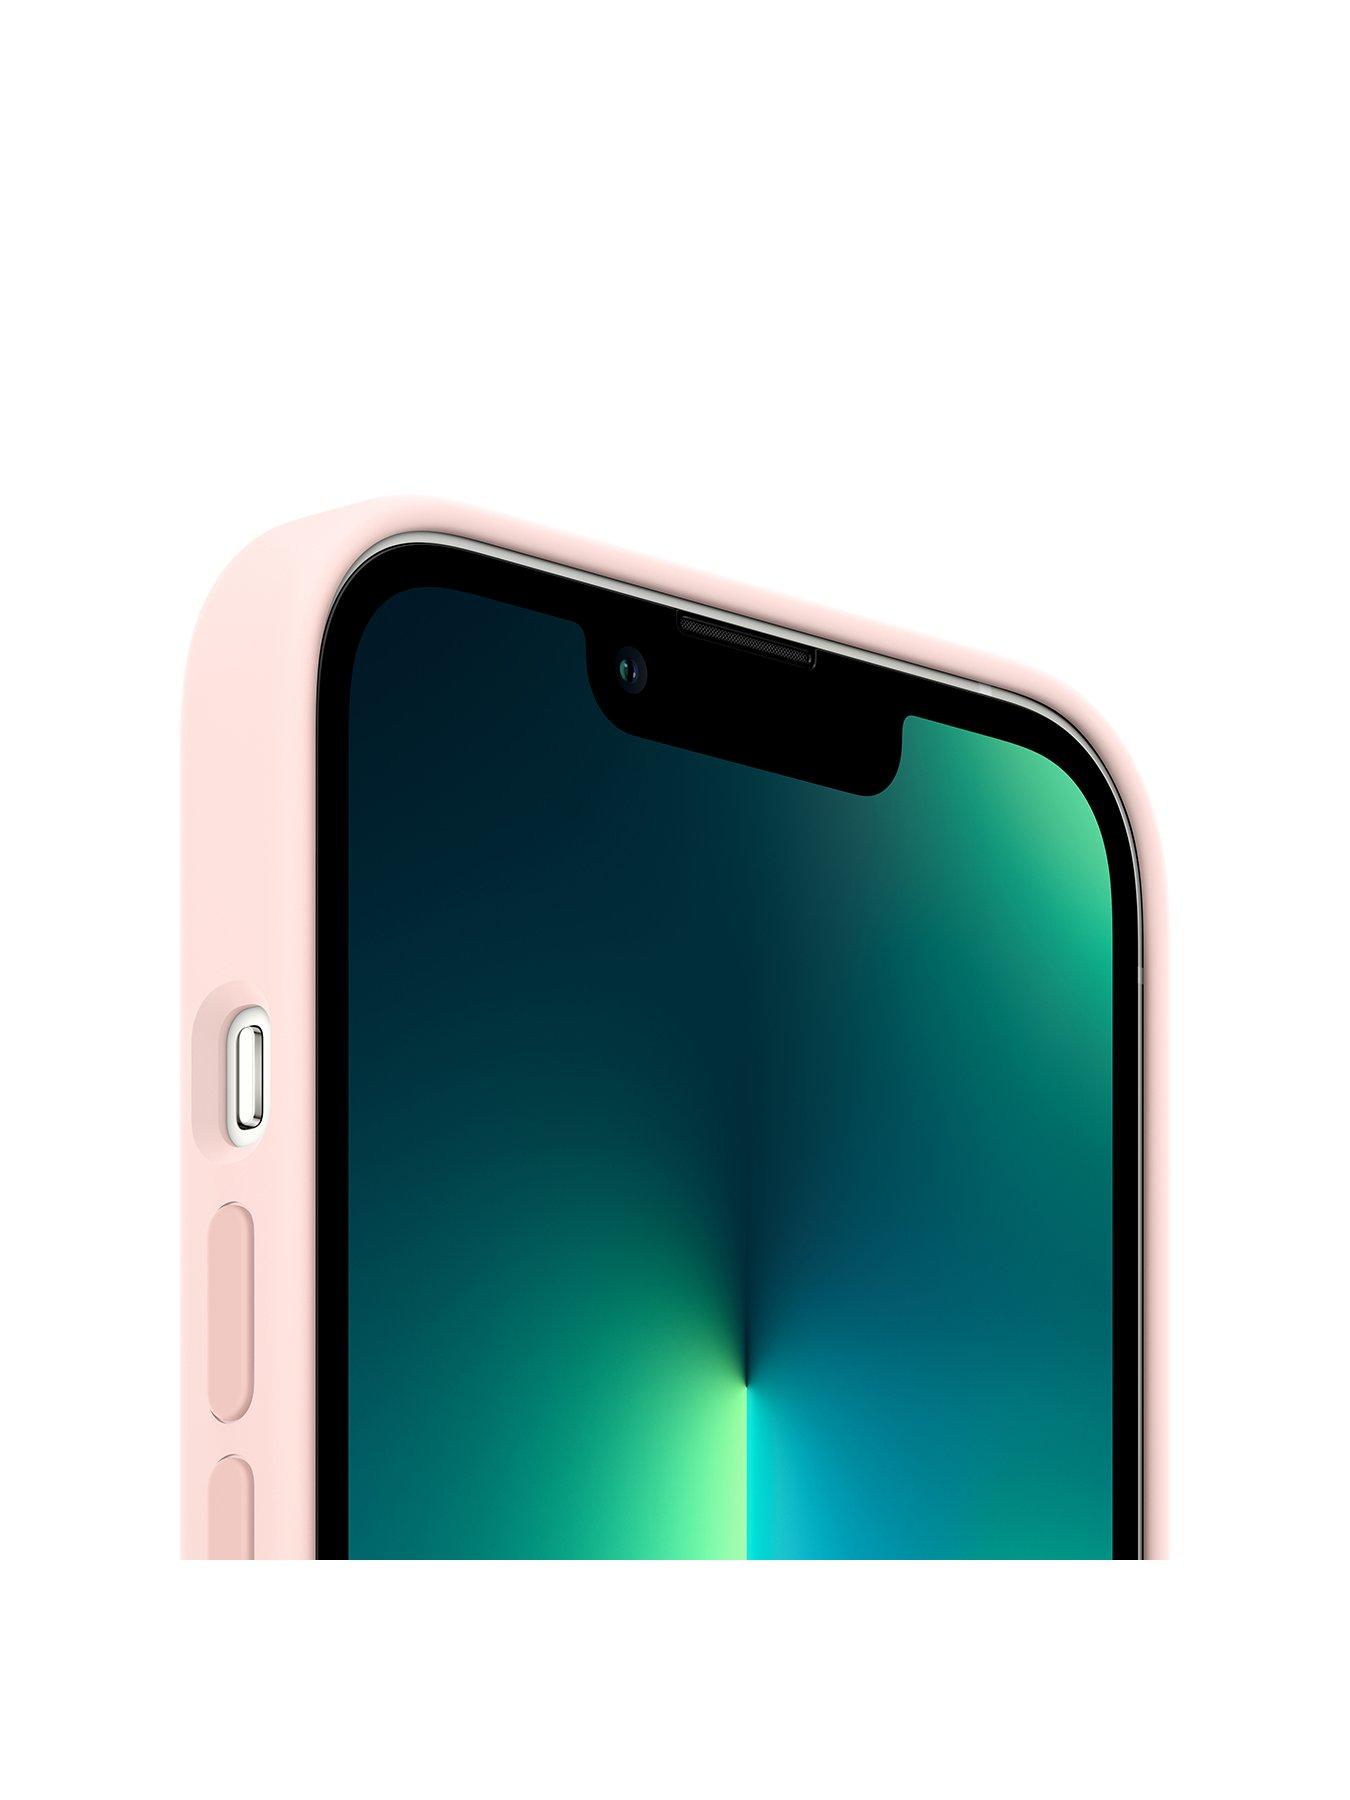 iPhone XS Max Silicone Case - Pink Sand - Apple (UK)